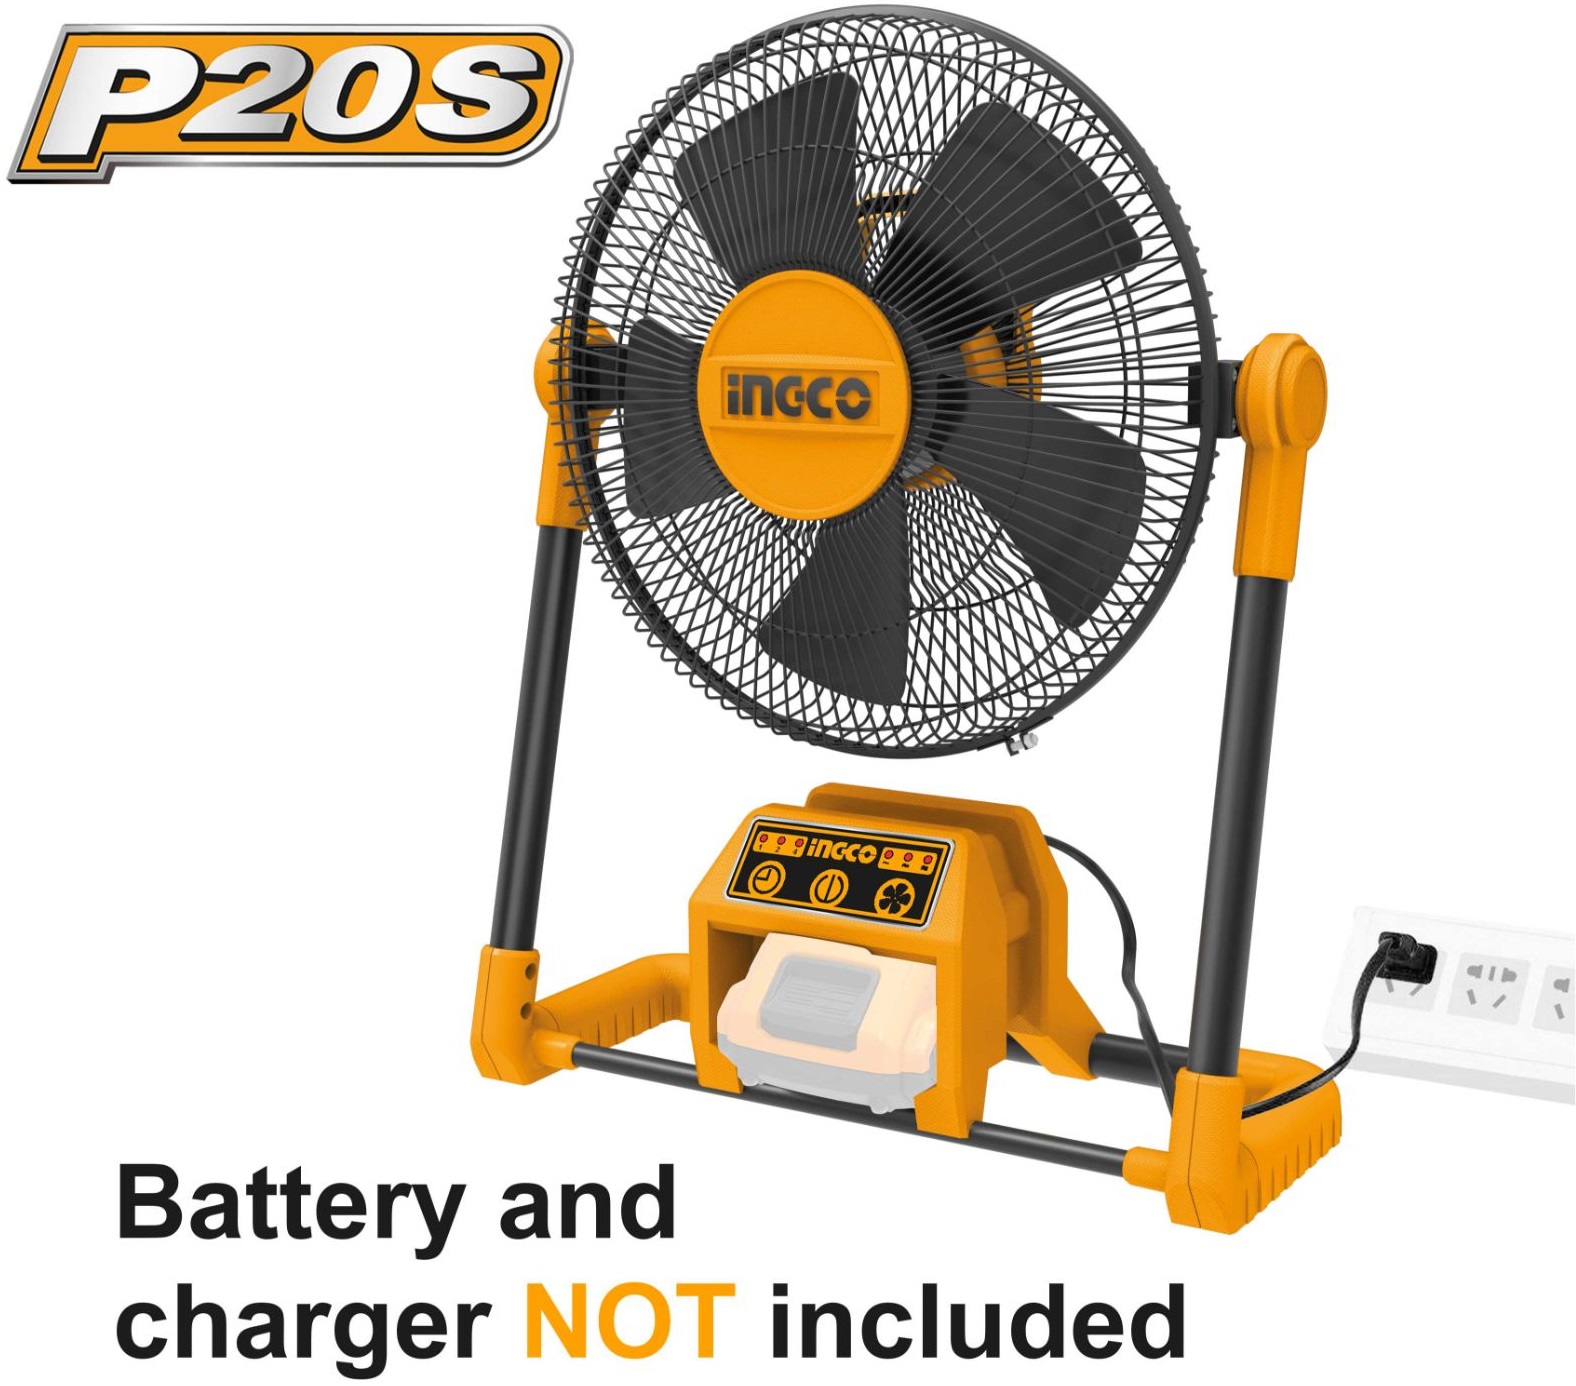 DC Voltage:20V. AC Voltage:220-240V~50/60HZ. Speed settings:3. Dimensions:12". Battery and charger sold separately. Packed by carton box.